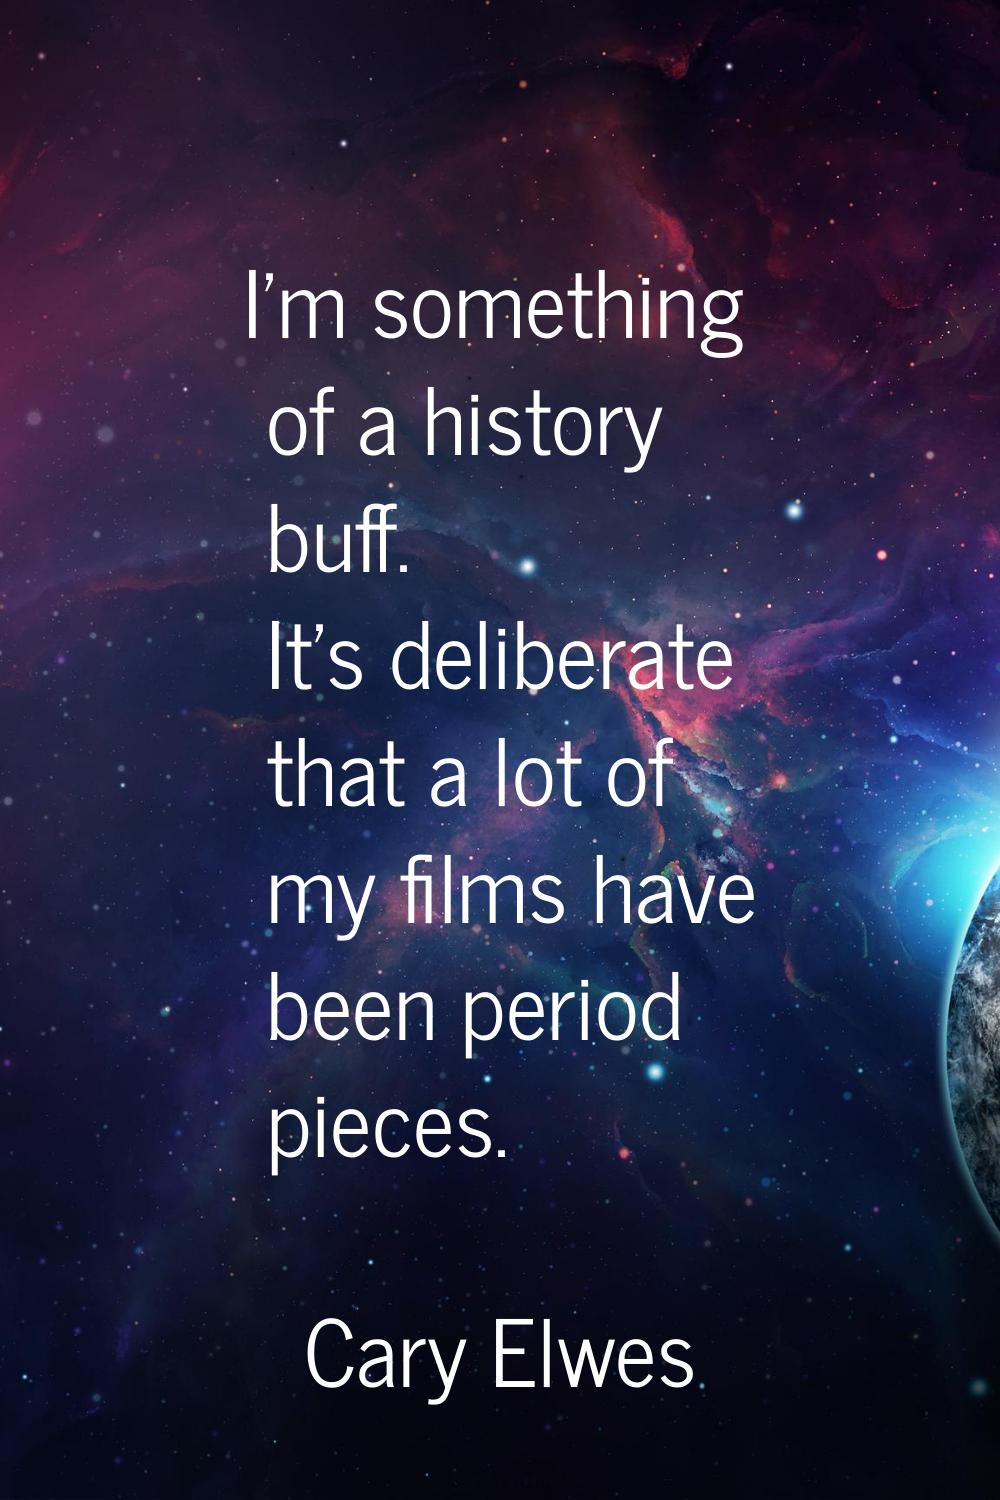 I'm something of a history buff. It's deliberate that a lot of my films have been period pieces.